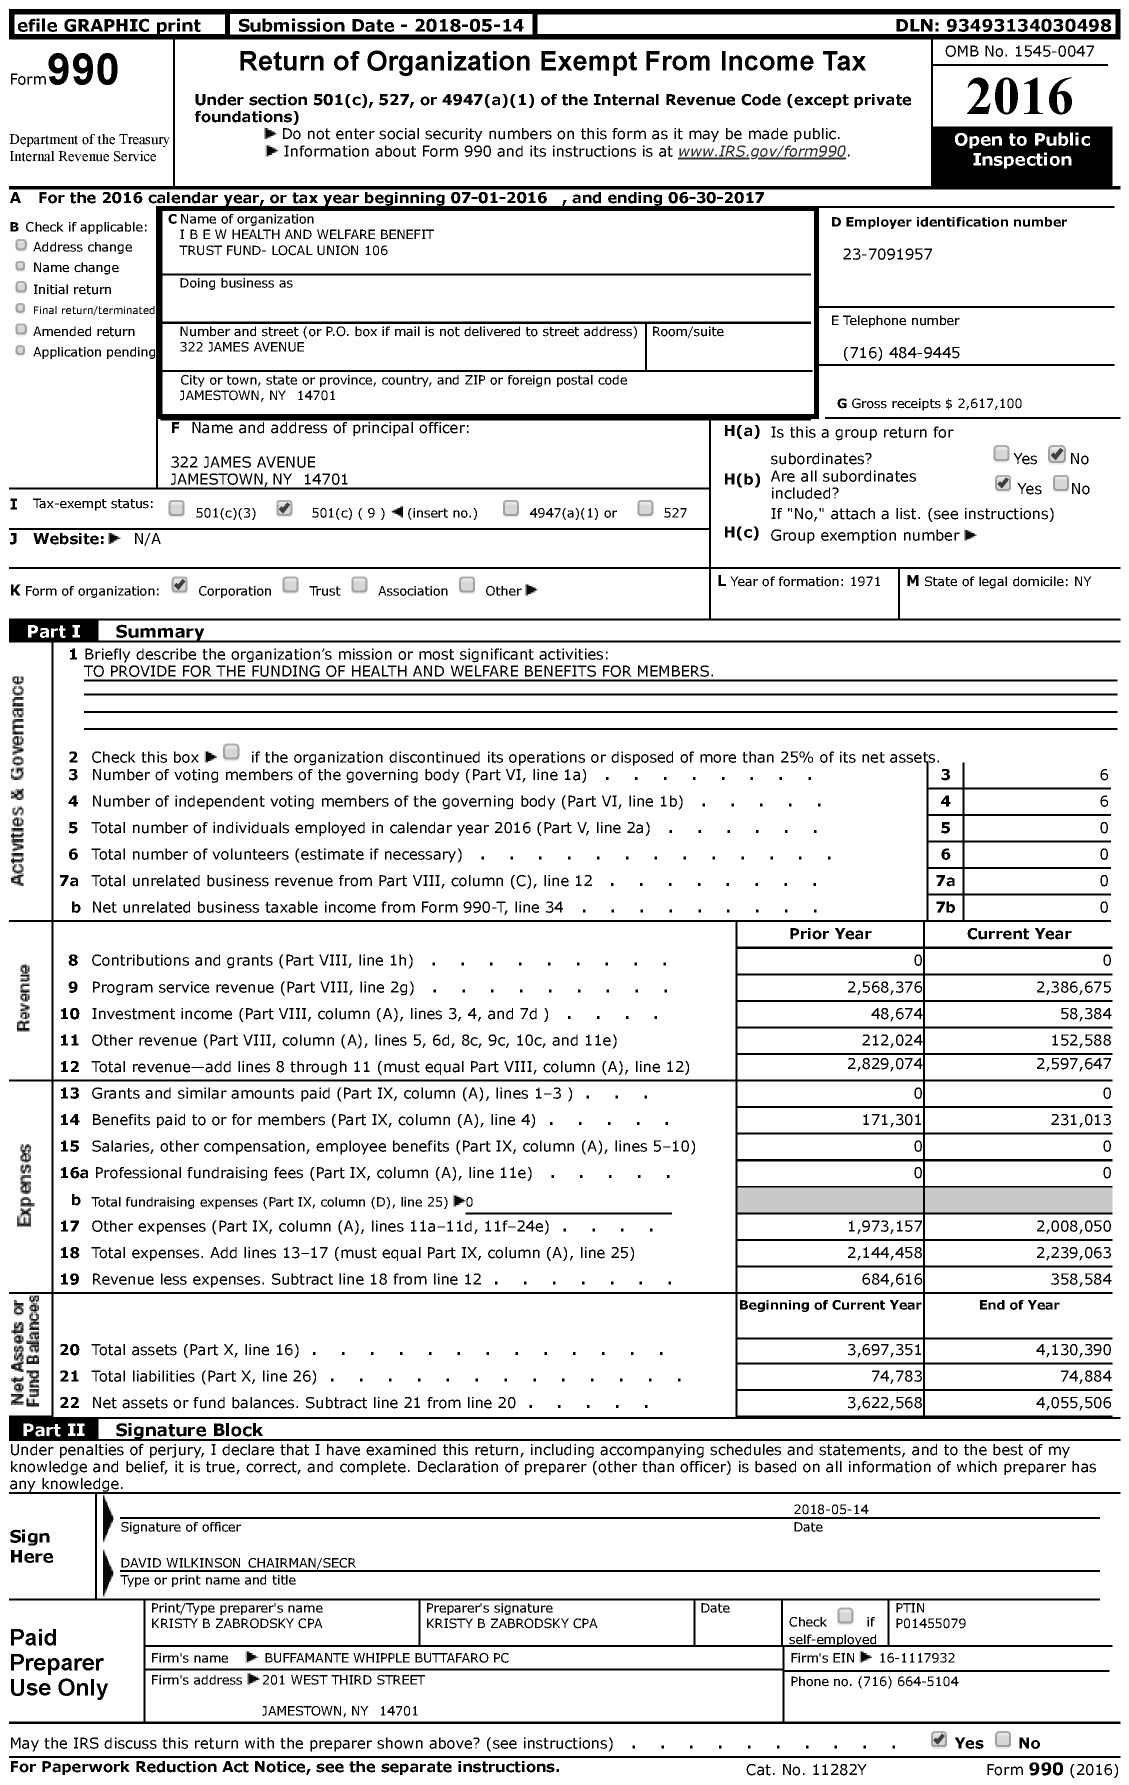 Image of first page of 2016 Form 990 for I B E W Health and Welfare Benefit Trust Fund- Local Union 106